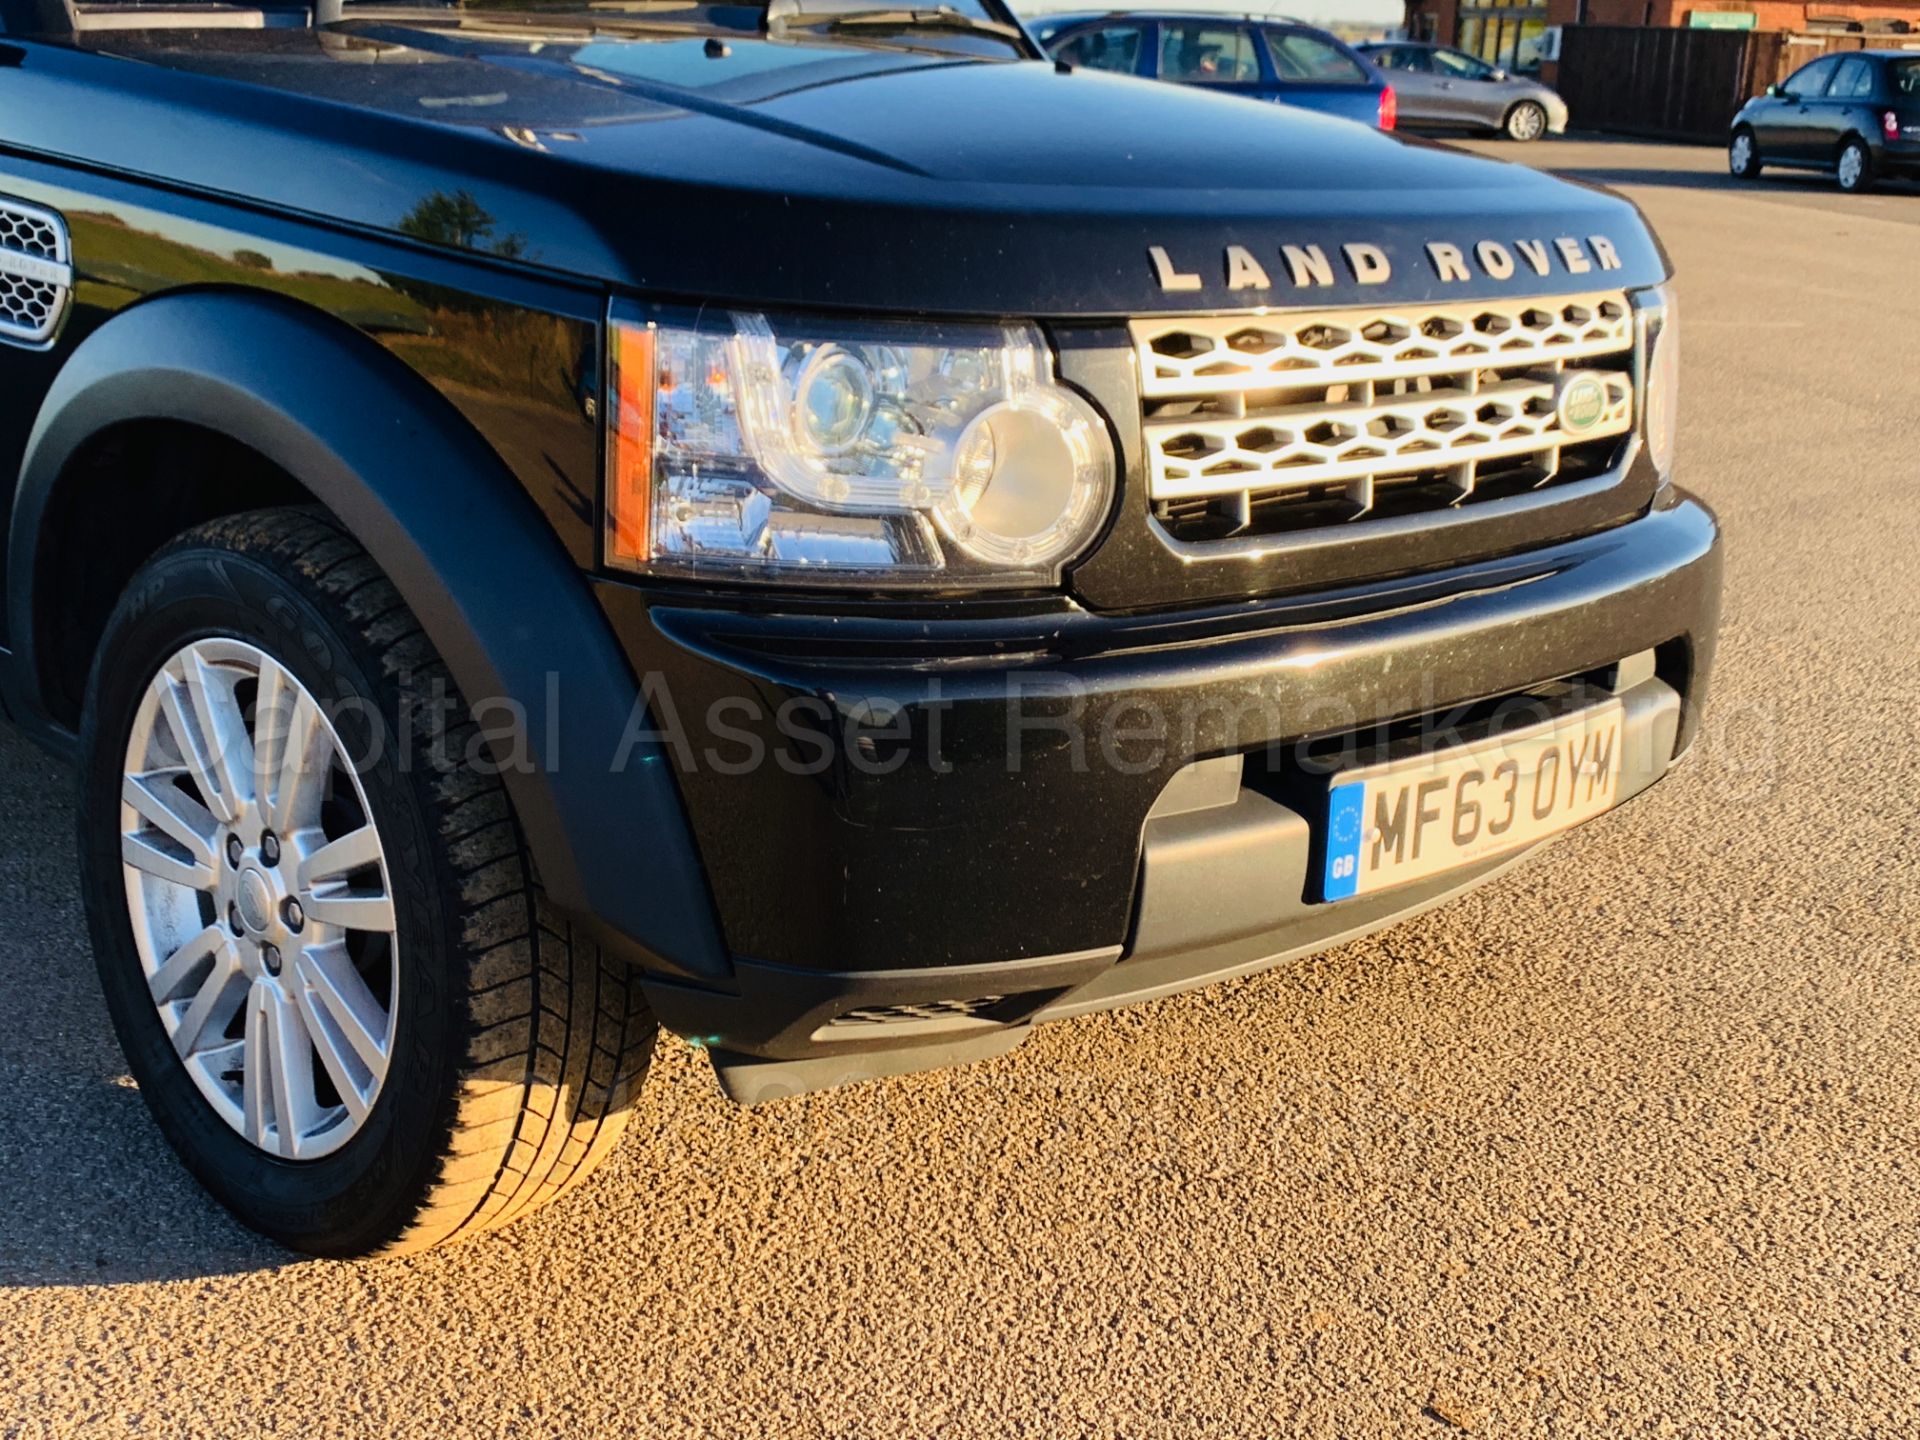 (On Sale) LAND ROVER DISCOVERY 4 (63 REG) '3.0 SDV6 - 8 SPEED AUTO' *LEATHER & SAT NAV* *TOP SPEC* - Image 13 of 47